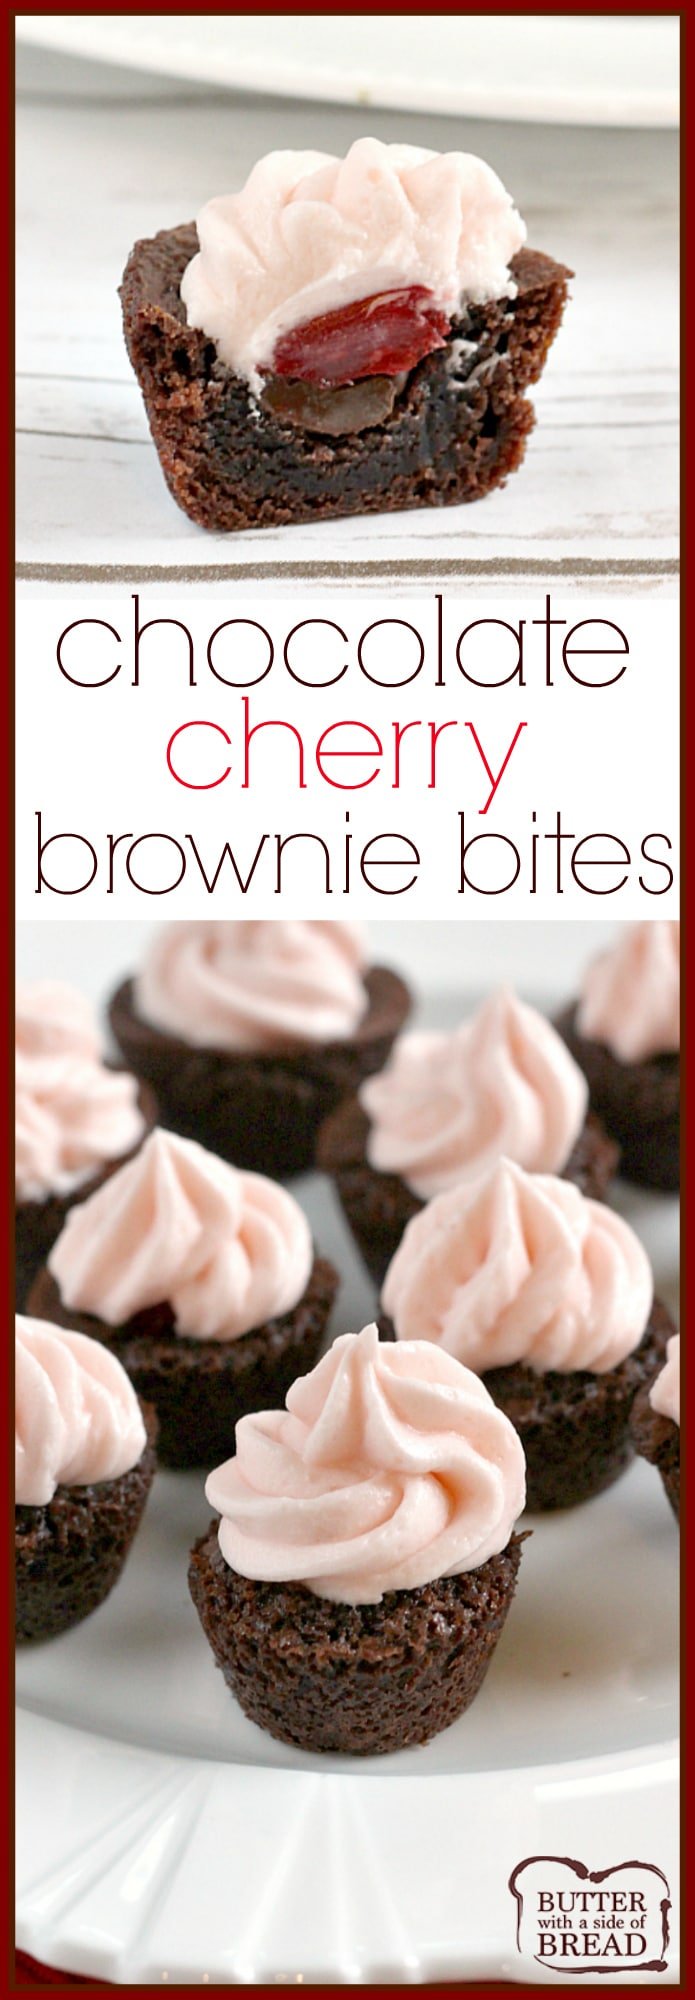 Chocolate Cherry Brownie Bites are mini brownies filled with chocolate chips, maraschino cherries and then topped with a cherry flavored cream cheese frosting!